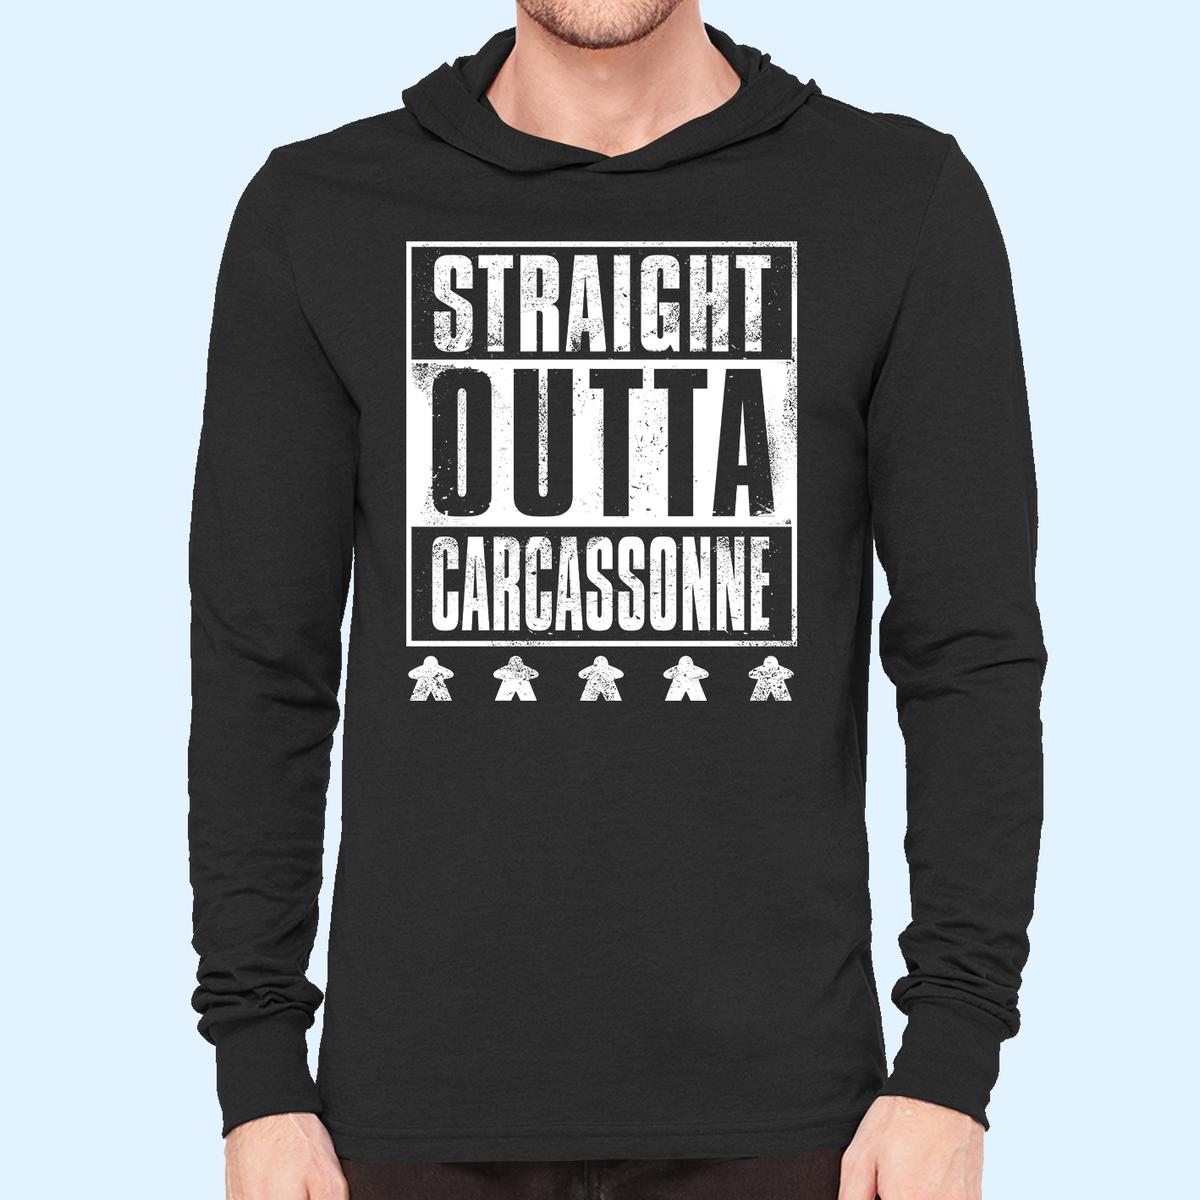 Straight OUTTA Carcassonne Board Game Hooded Longsleeve T-Shirt